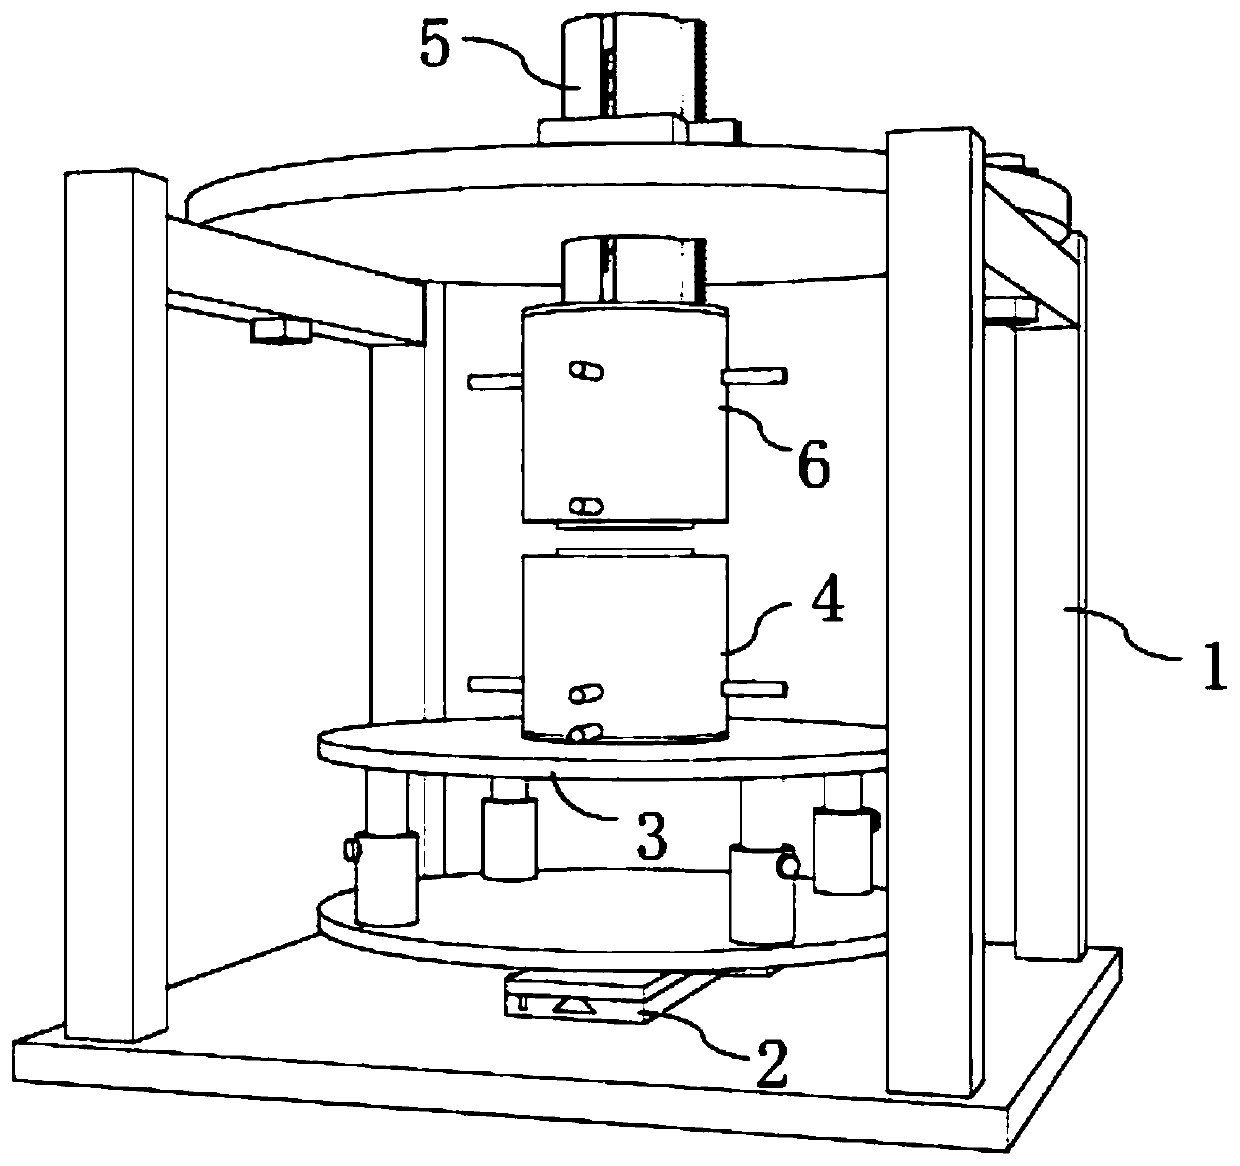 Counter-flow flame test table capable of accurately adjusting burner nozzles